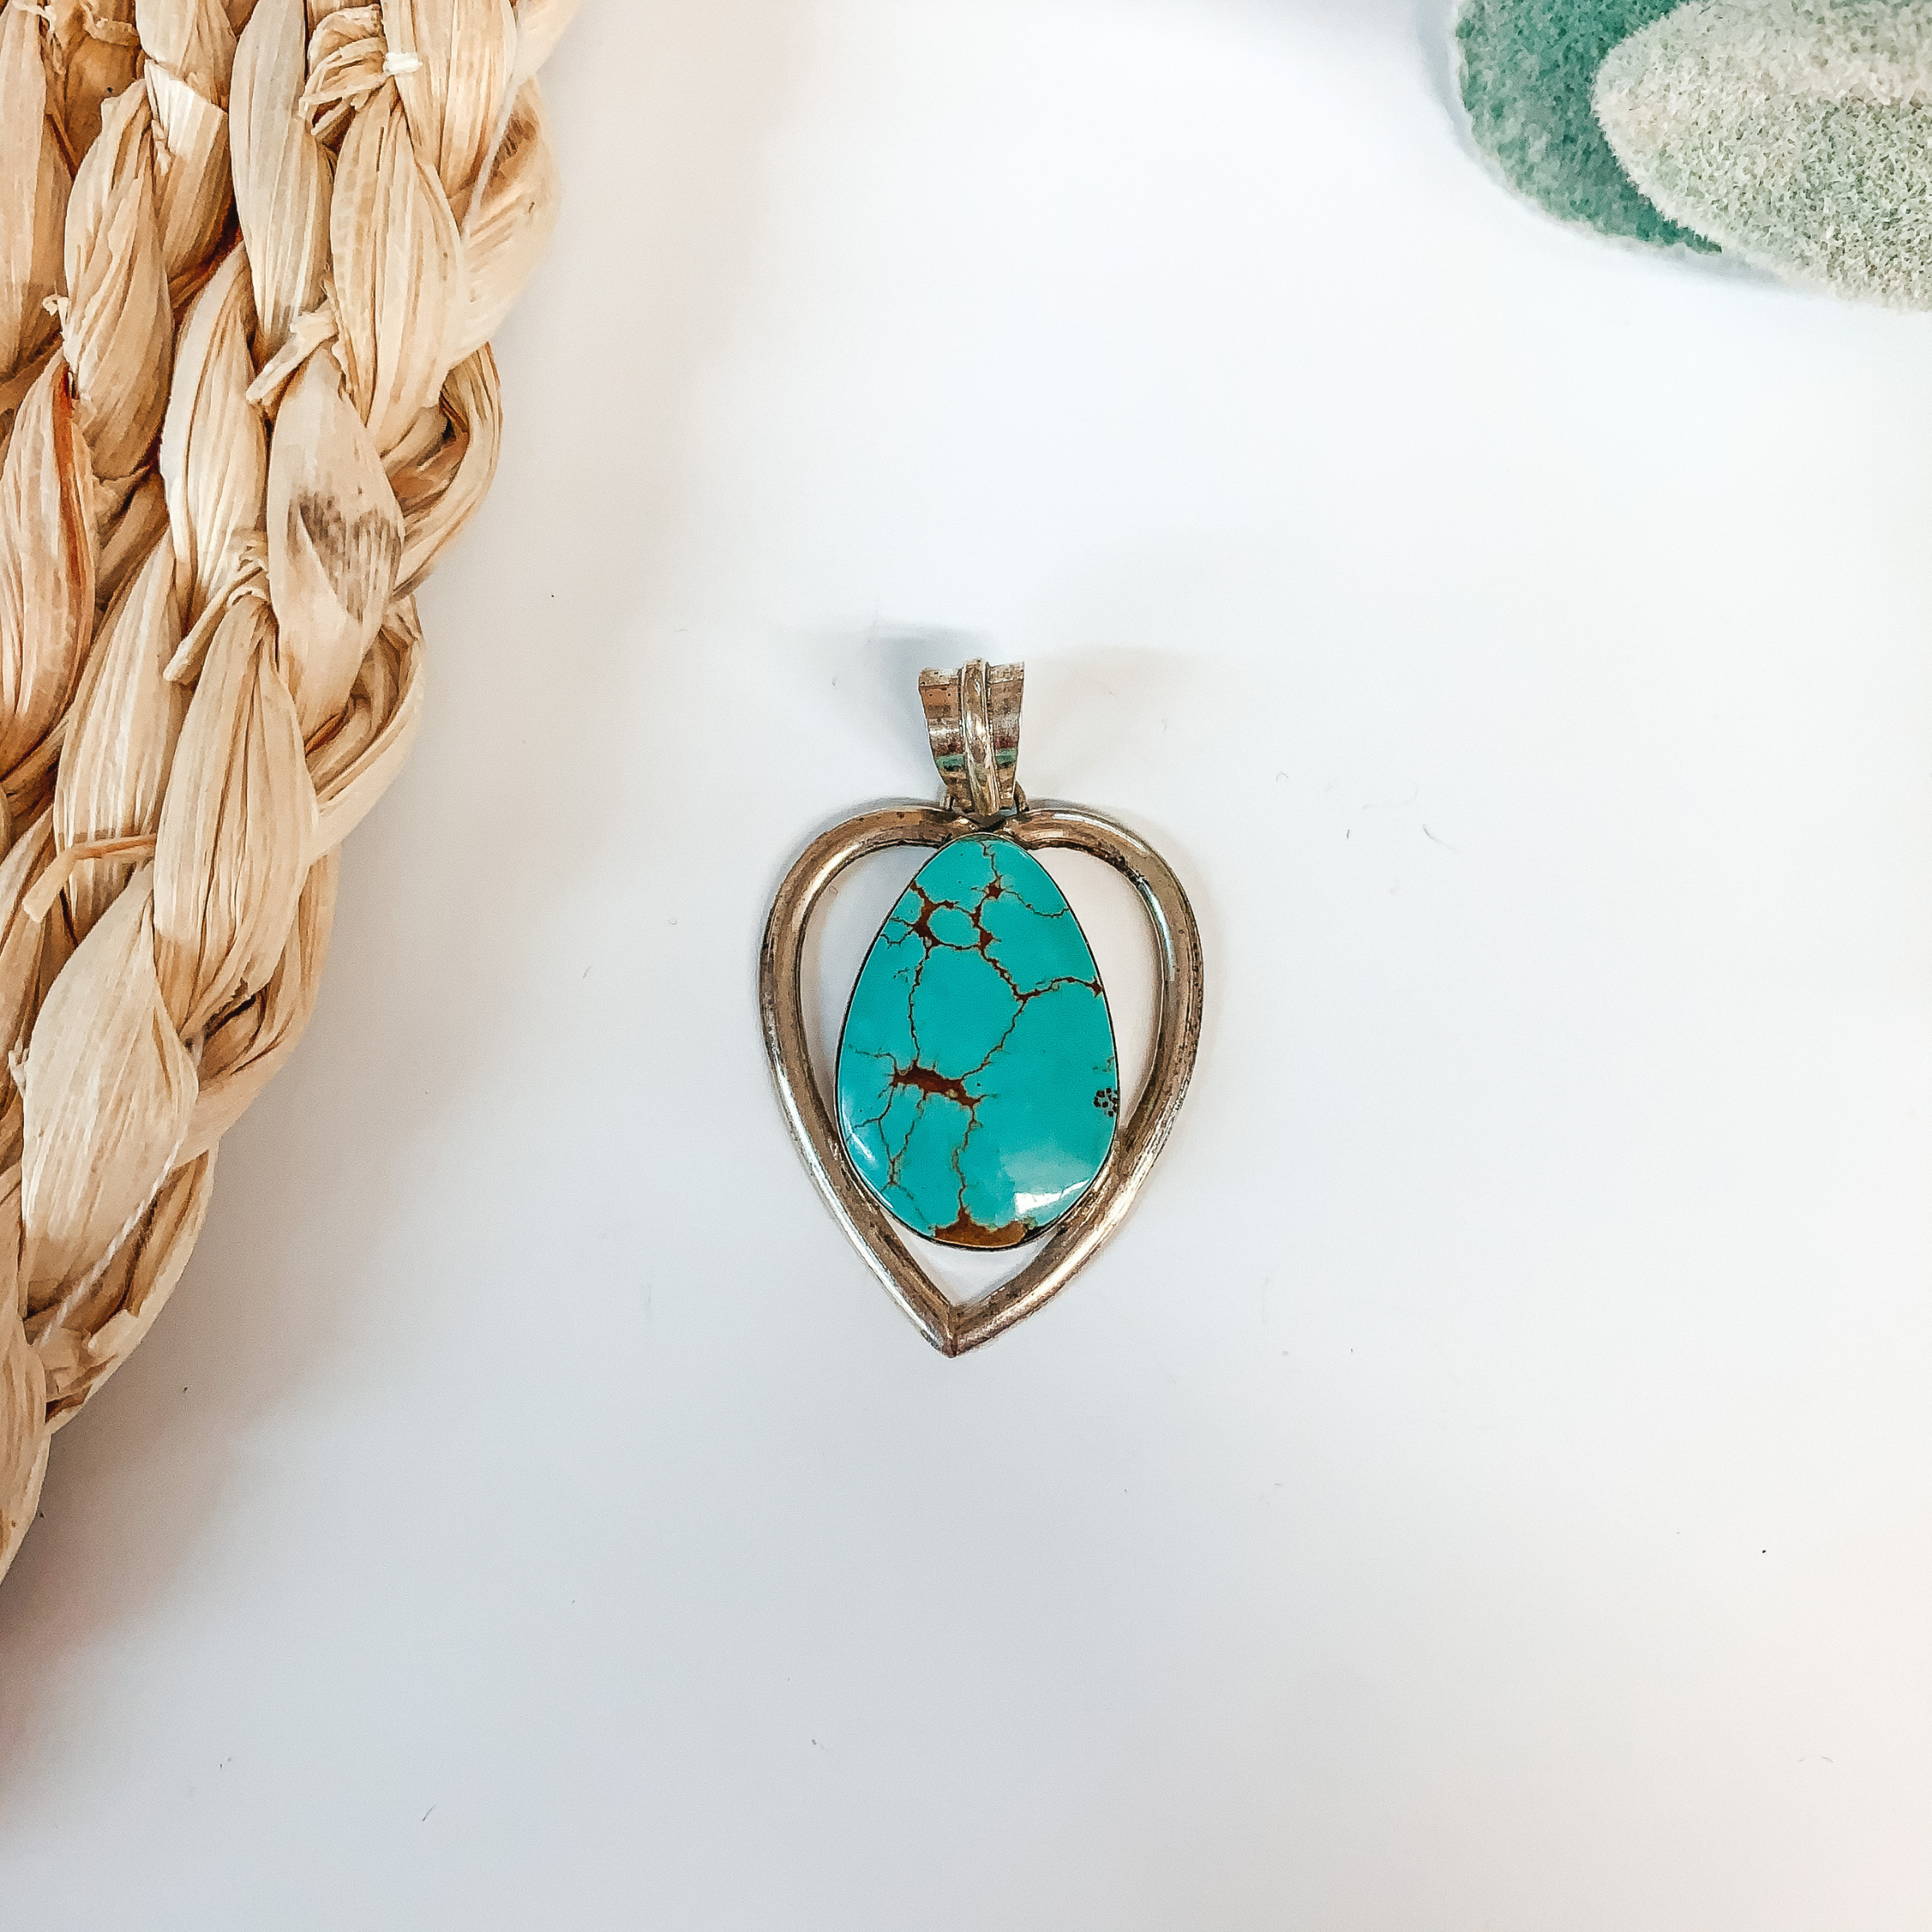 Dave Skeets | Navajo Handmade Sterling Silver Heart Pendant with Turquoise Stone - Giddy Up Glamour Boutique